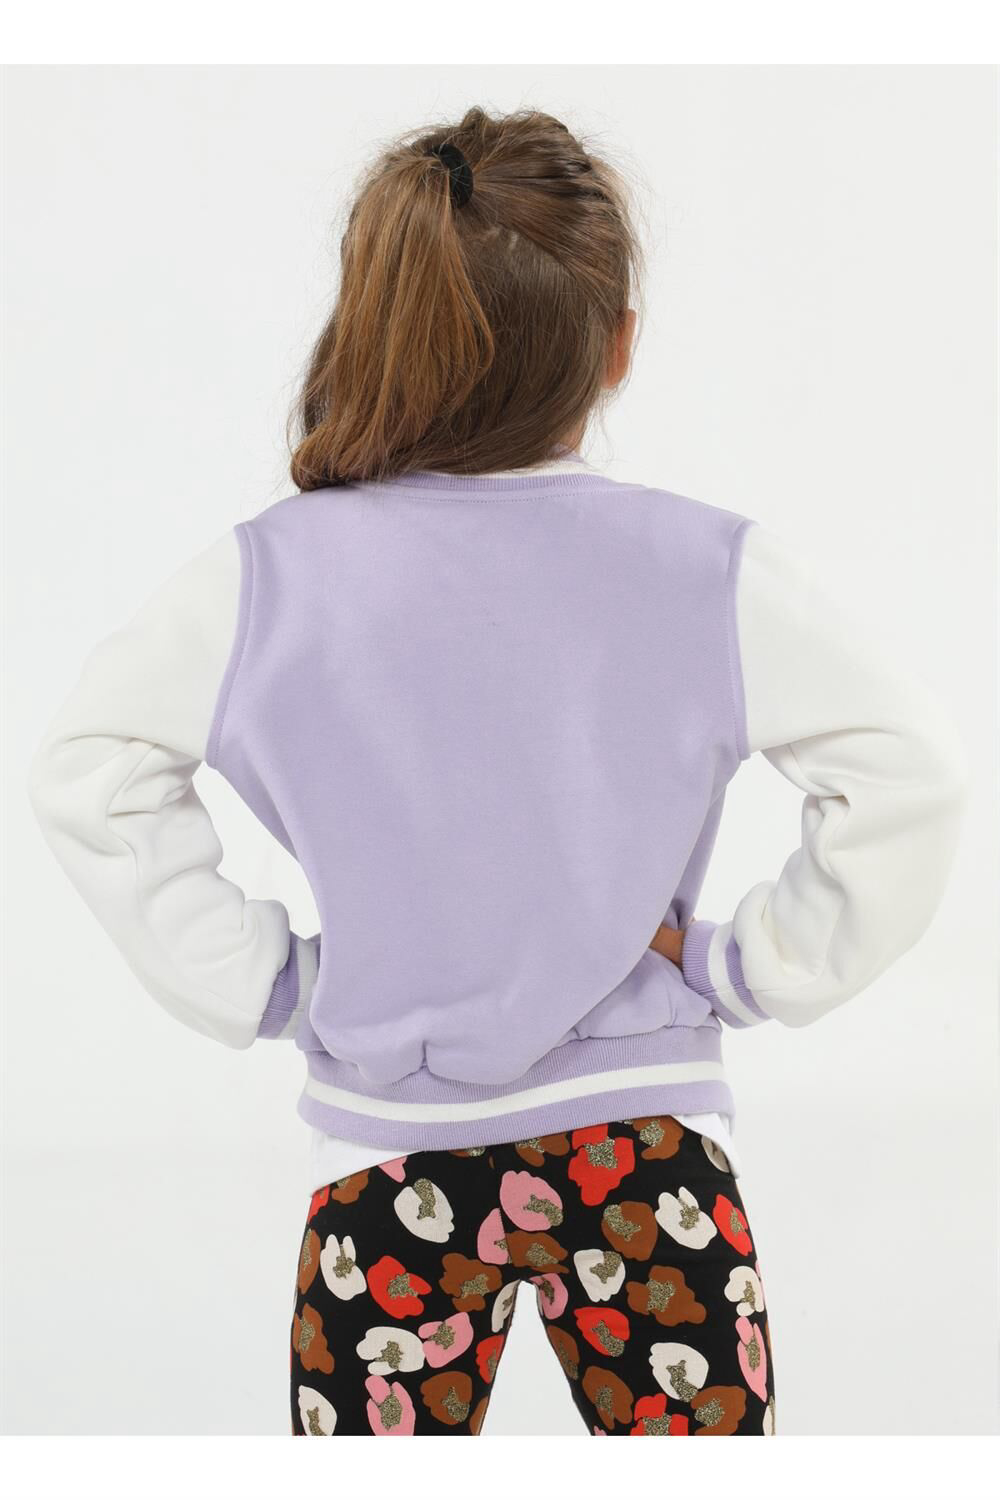 Children's jacket suitable for unisex - with a front zipper - winter